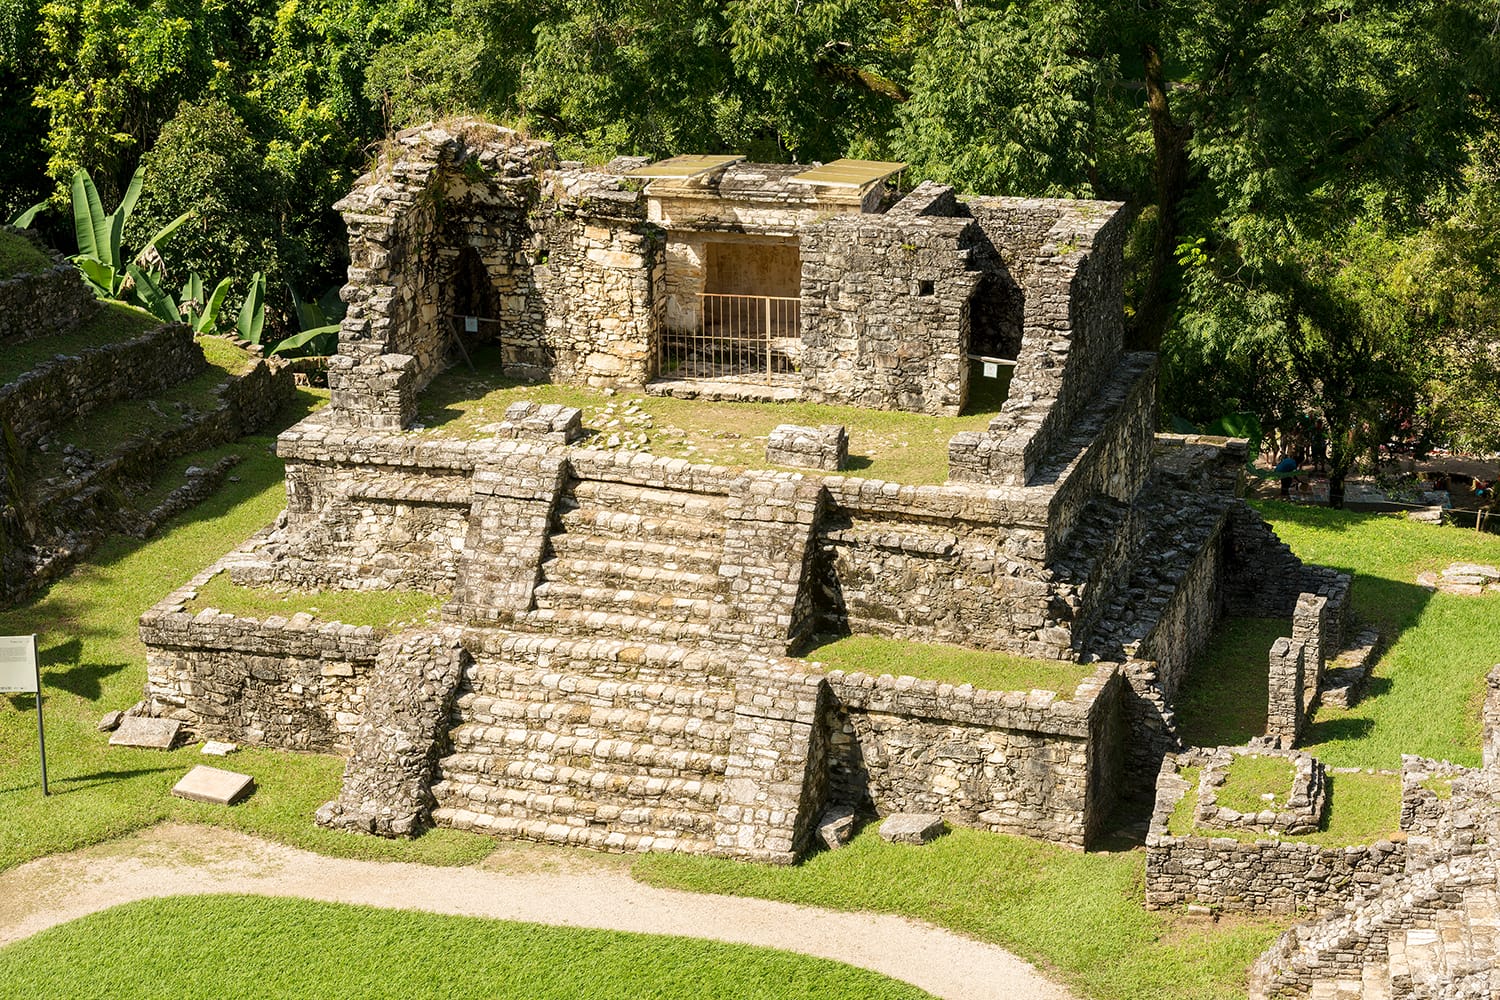 Ancient Mayan structures at the heritage site in Palenque Mexico